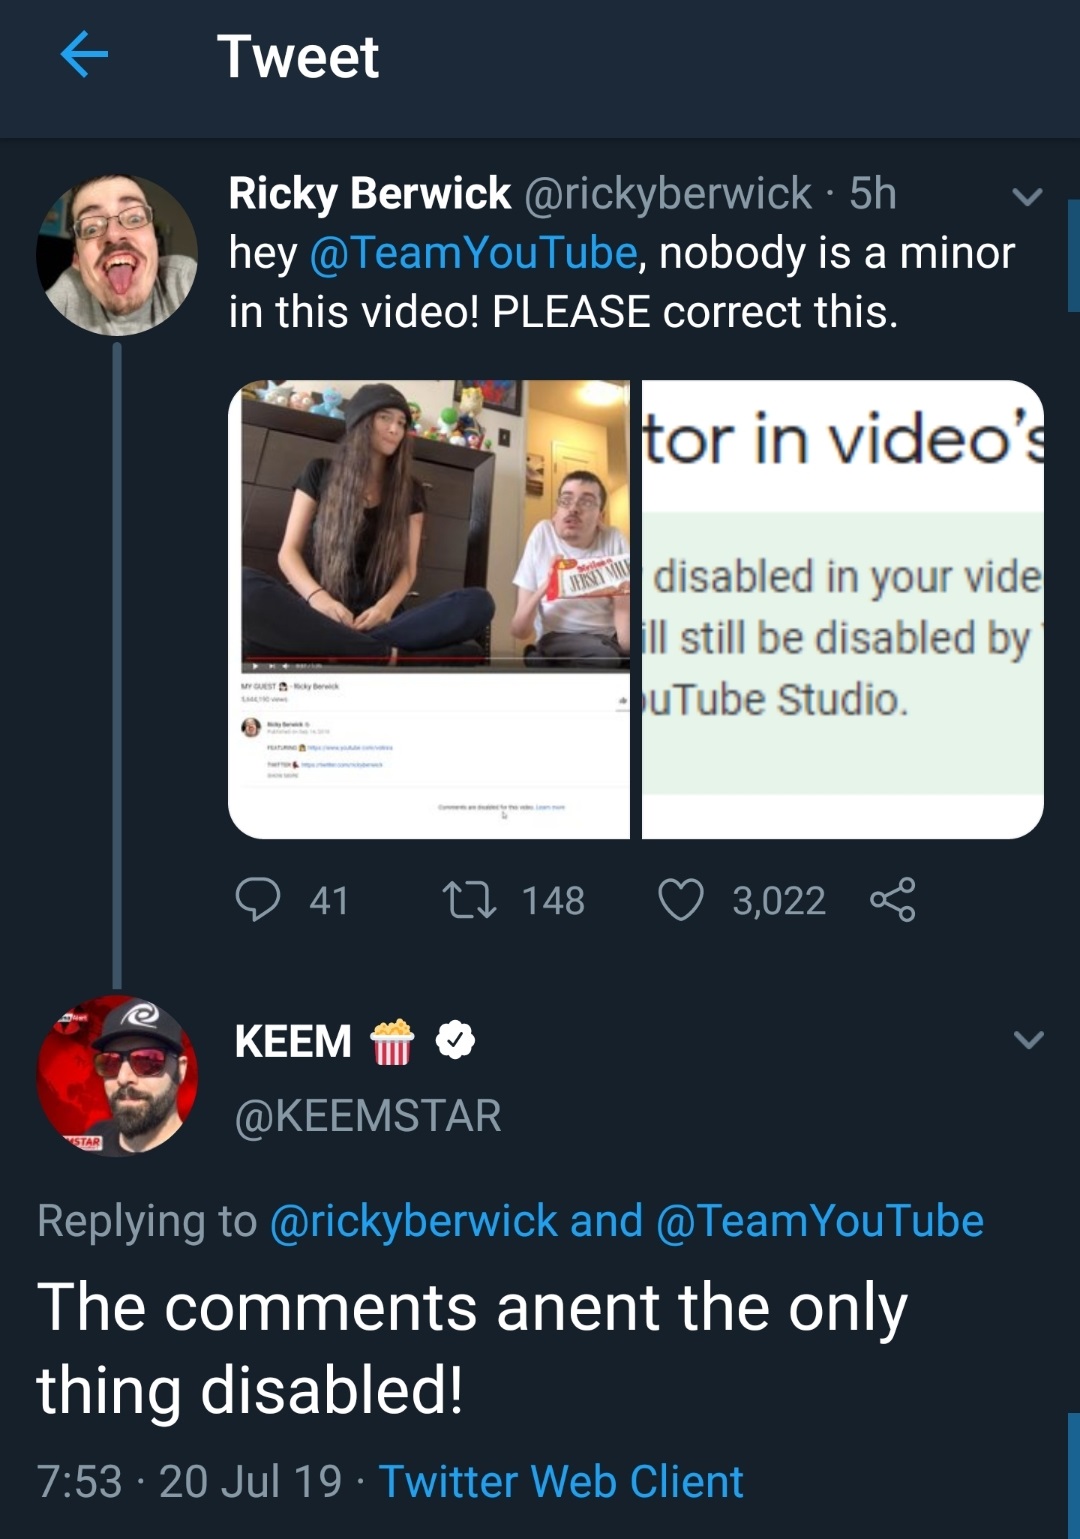 Tweet Ricky Berwick hey , nobody is a minor in this video! Please correct this. tor in video's disabled in your vide Il still be disabled by uTube Studio W Guest Keem Star and @ TeamYouTube The anent the only thing di